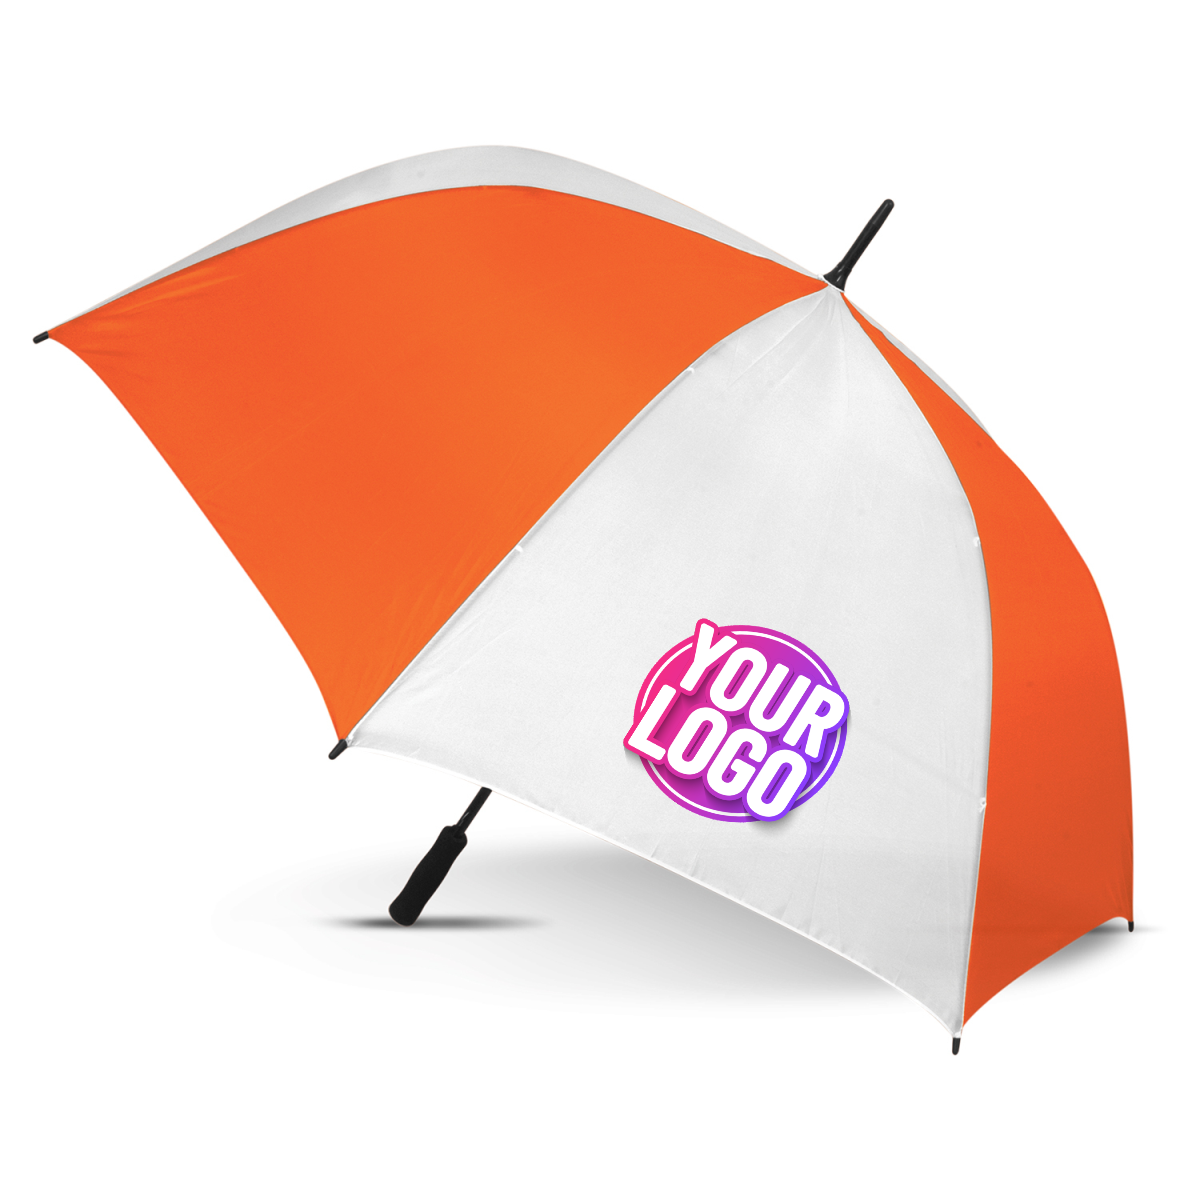 CUSTOM BRANDED - STORM PROOF ULTIMATE®️ Heavy Duty Sports Umbrella with Windproof Fibreglass Frame - Premium Automatic Opening - White Panels